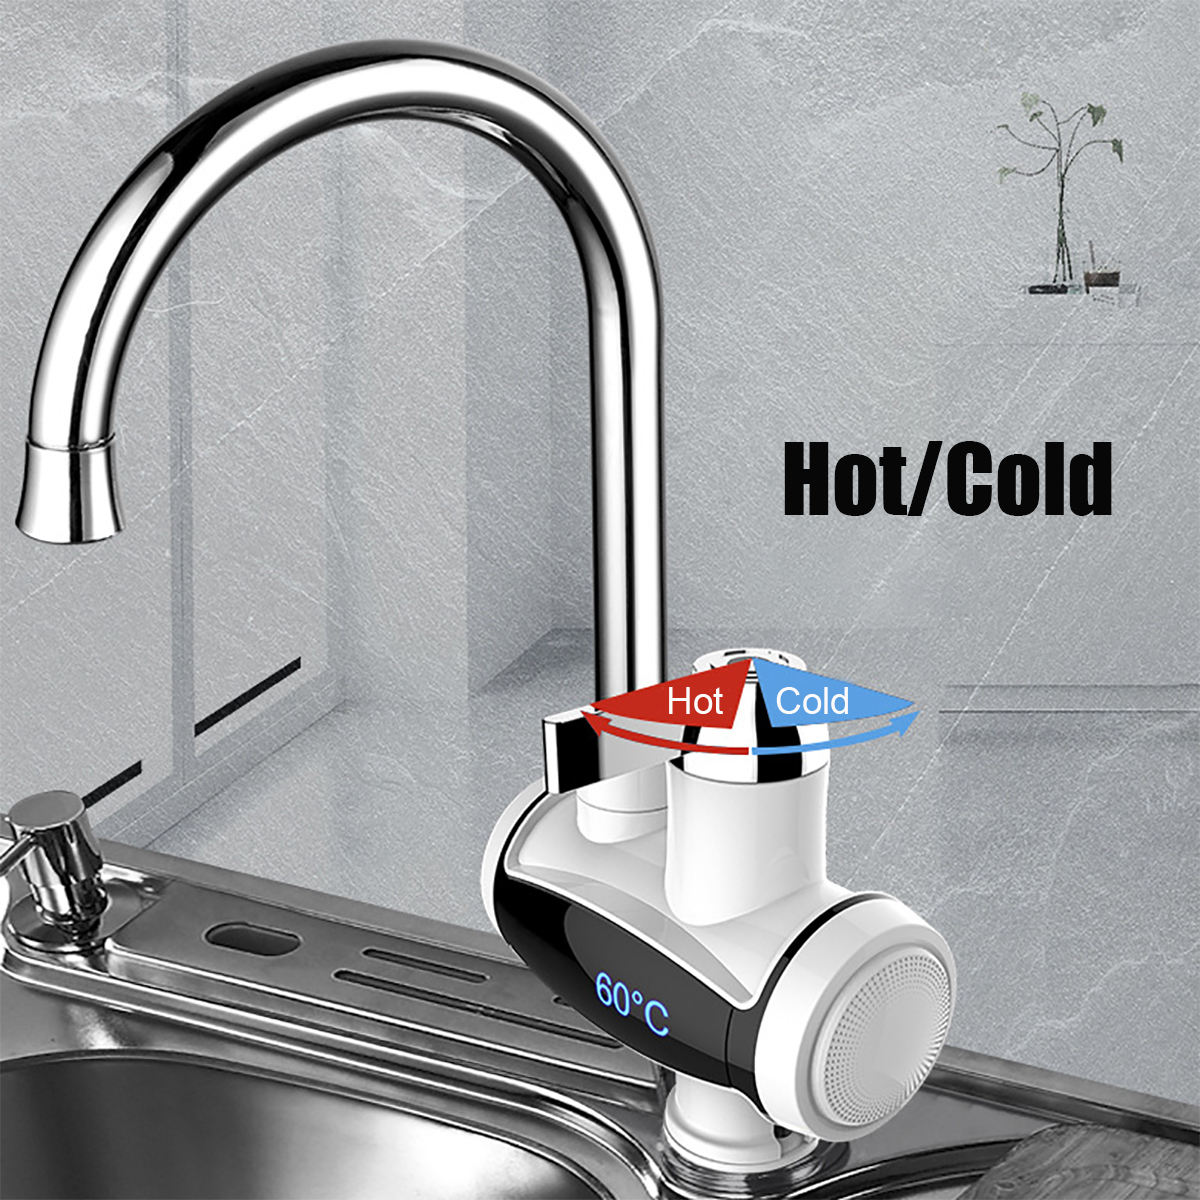 220V-3000W-Electric-Faucet-Instant-Hot-Water-Heater-Tap-Home-Bathroom-Kitchen-Faucet-1388305